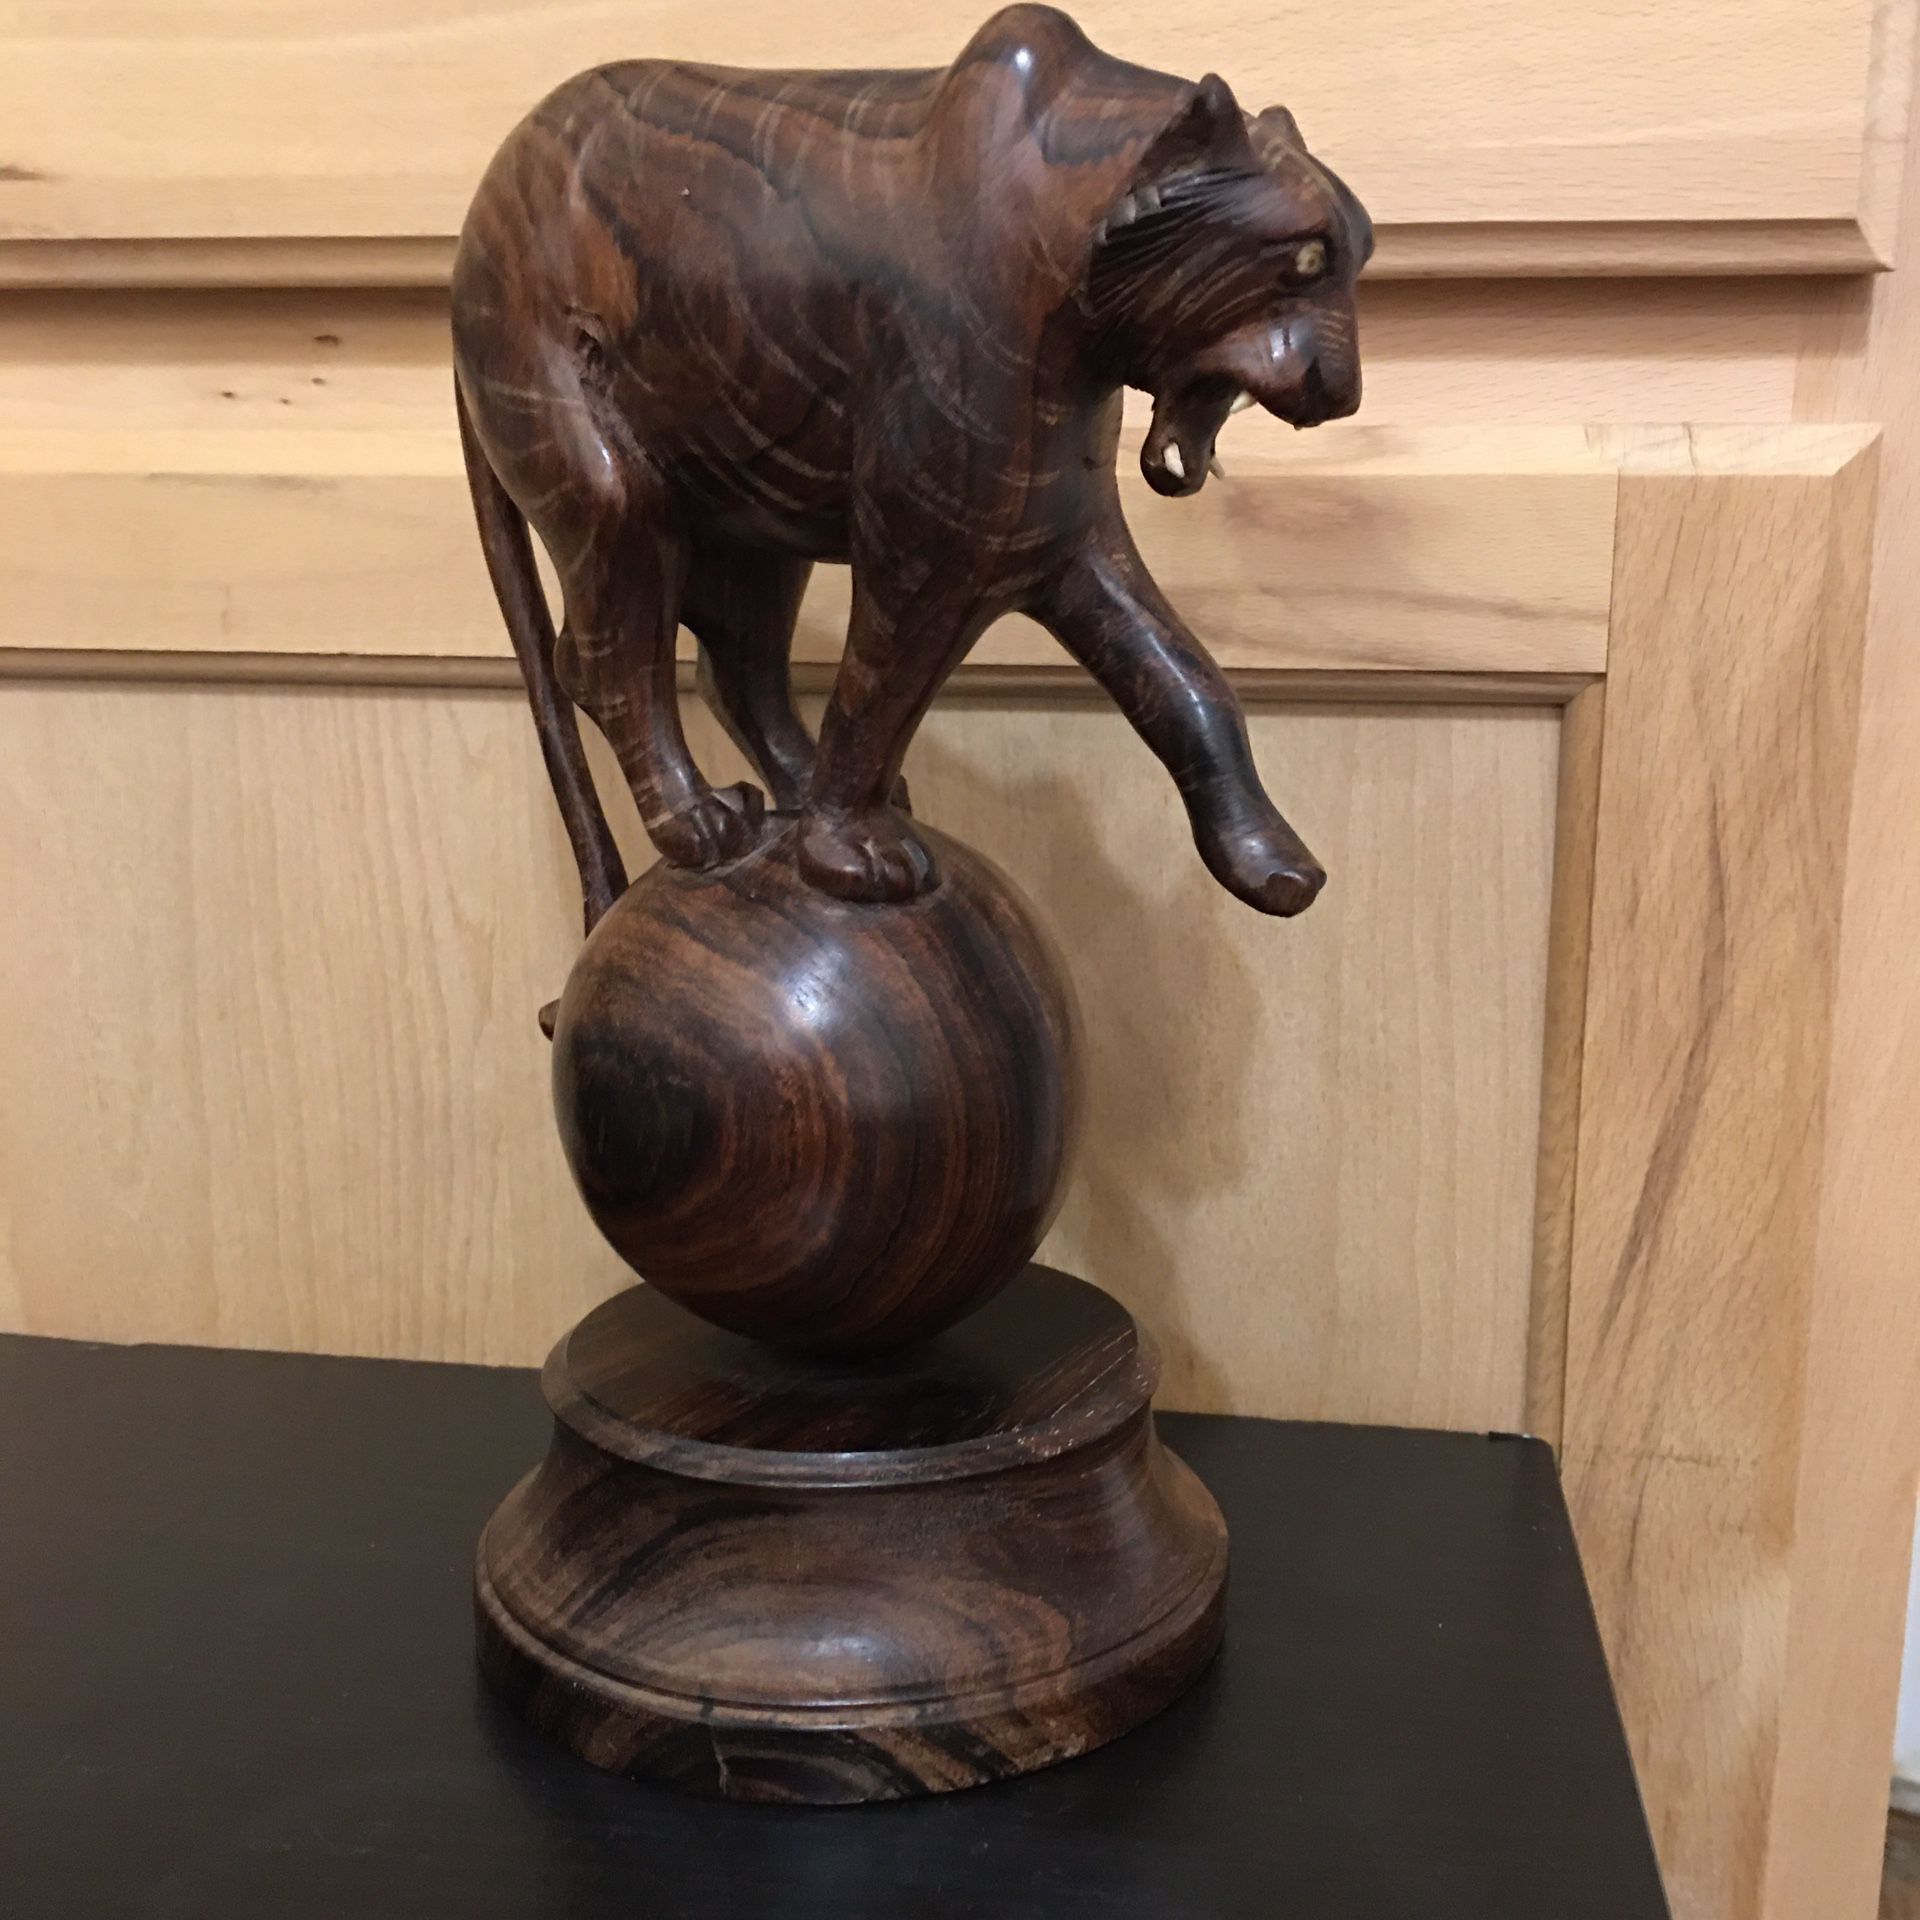 Vintage Ironwood Carved Tiger On Ball Statue Sculpture 9 Tall Rich Brown Color